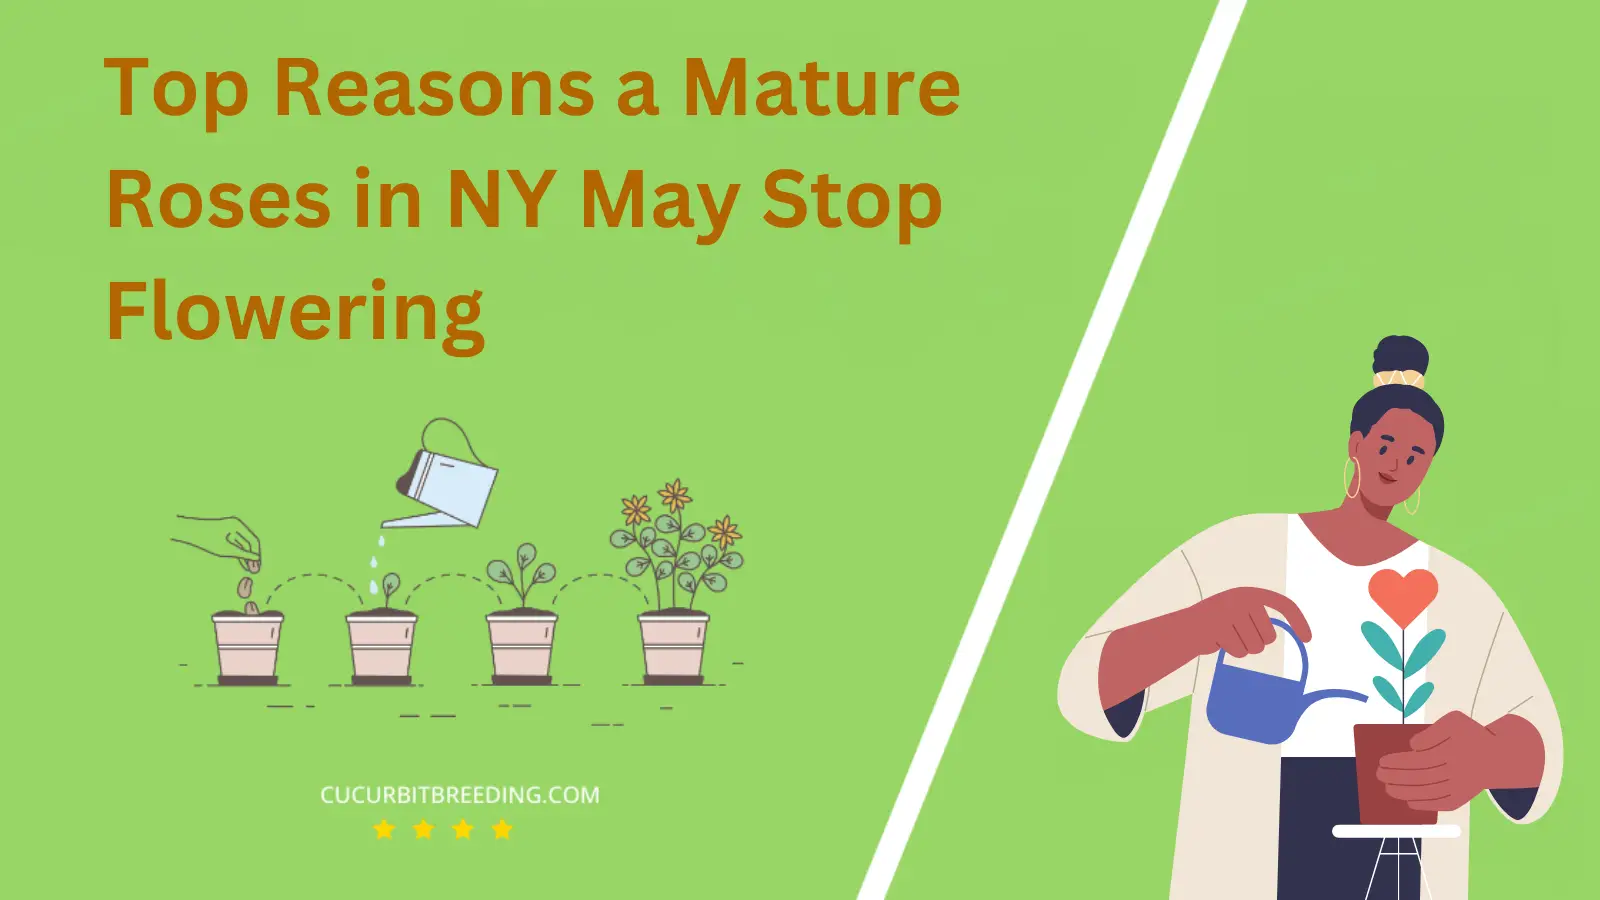 Top Reasons a Mature Roses in NY May Stop Flowering